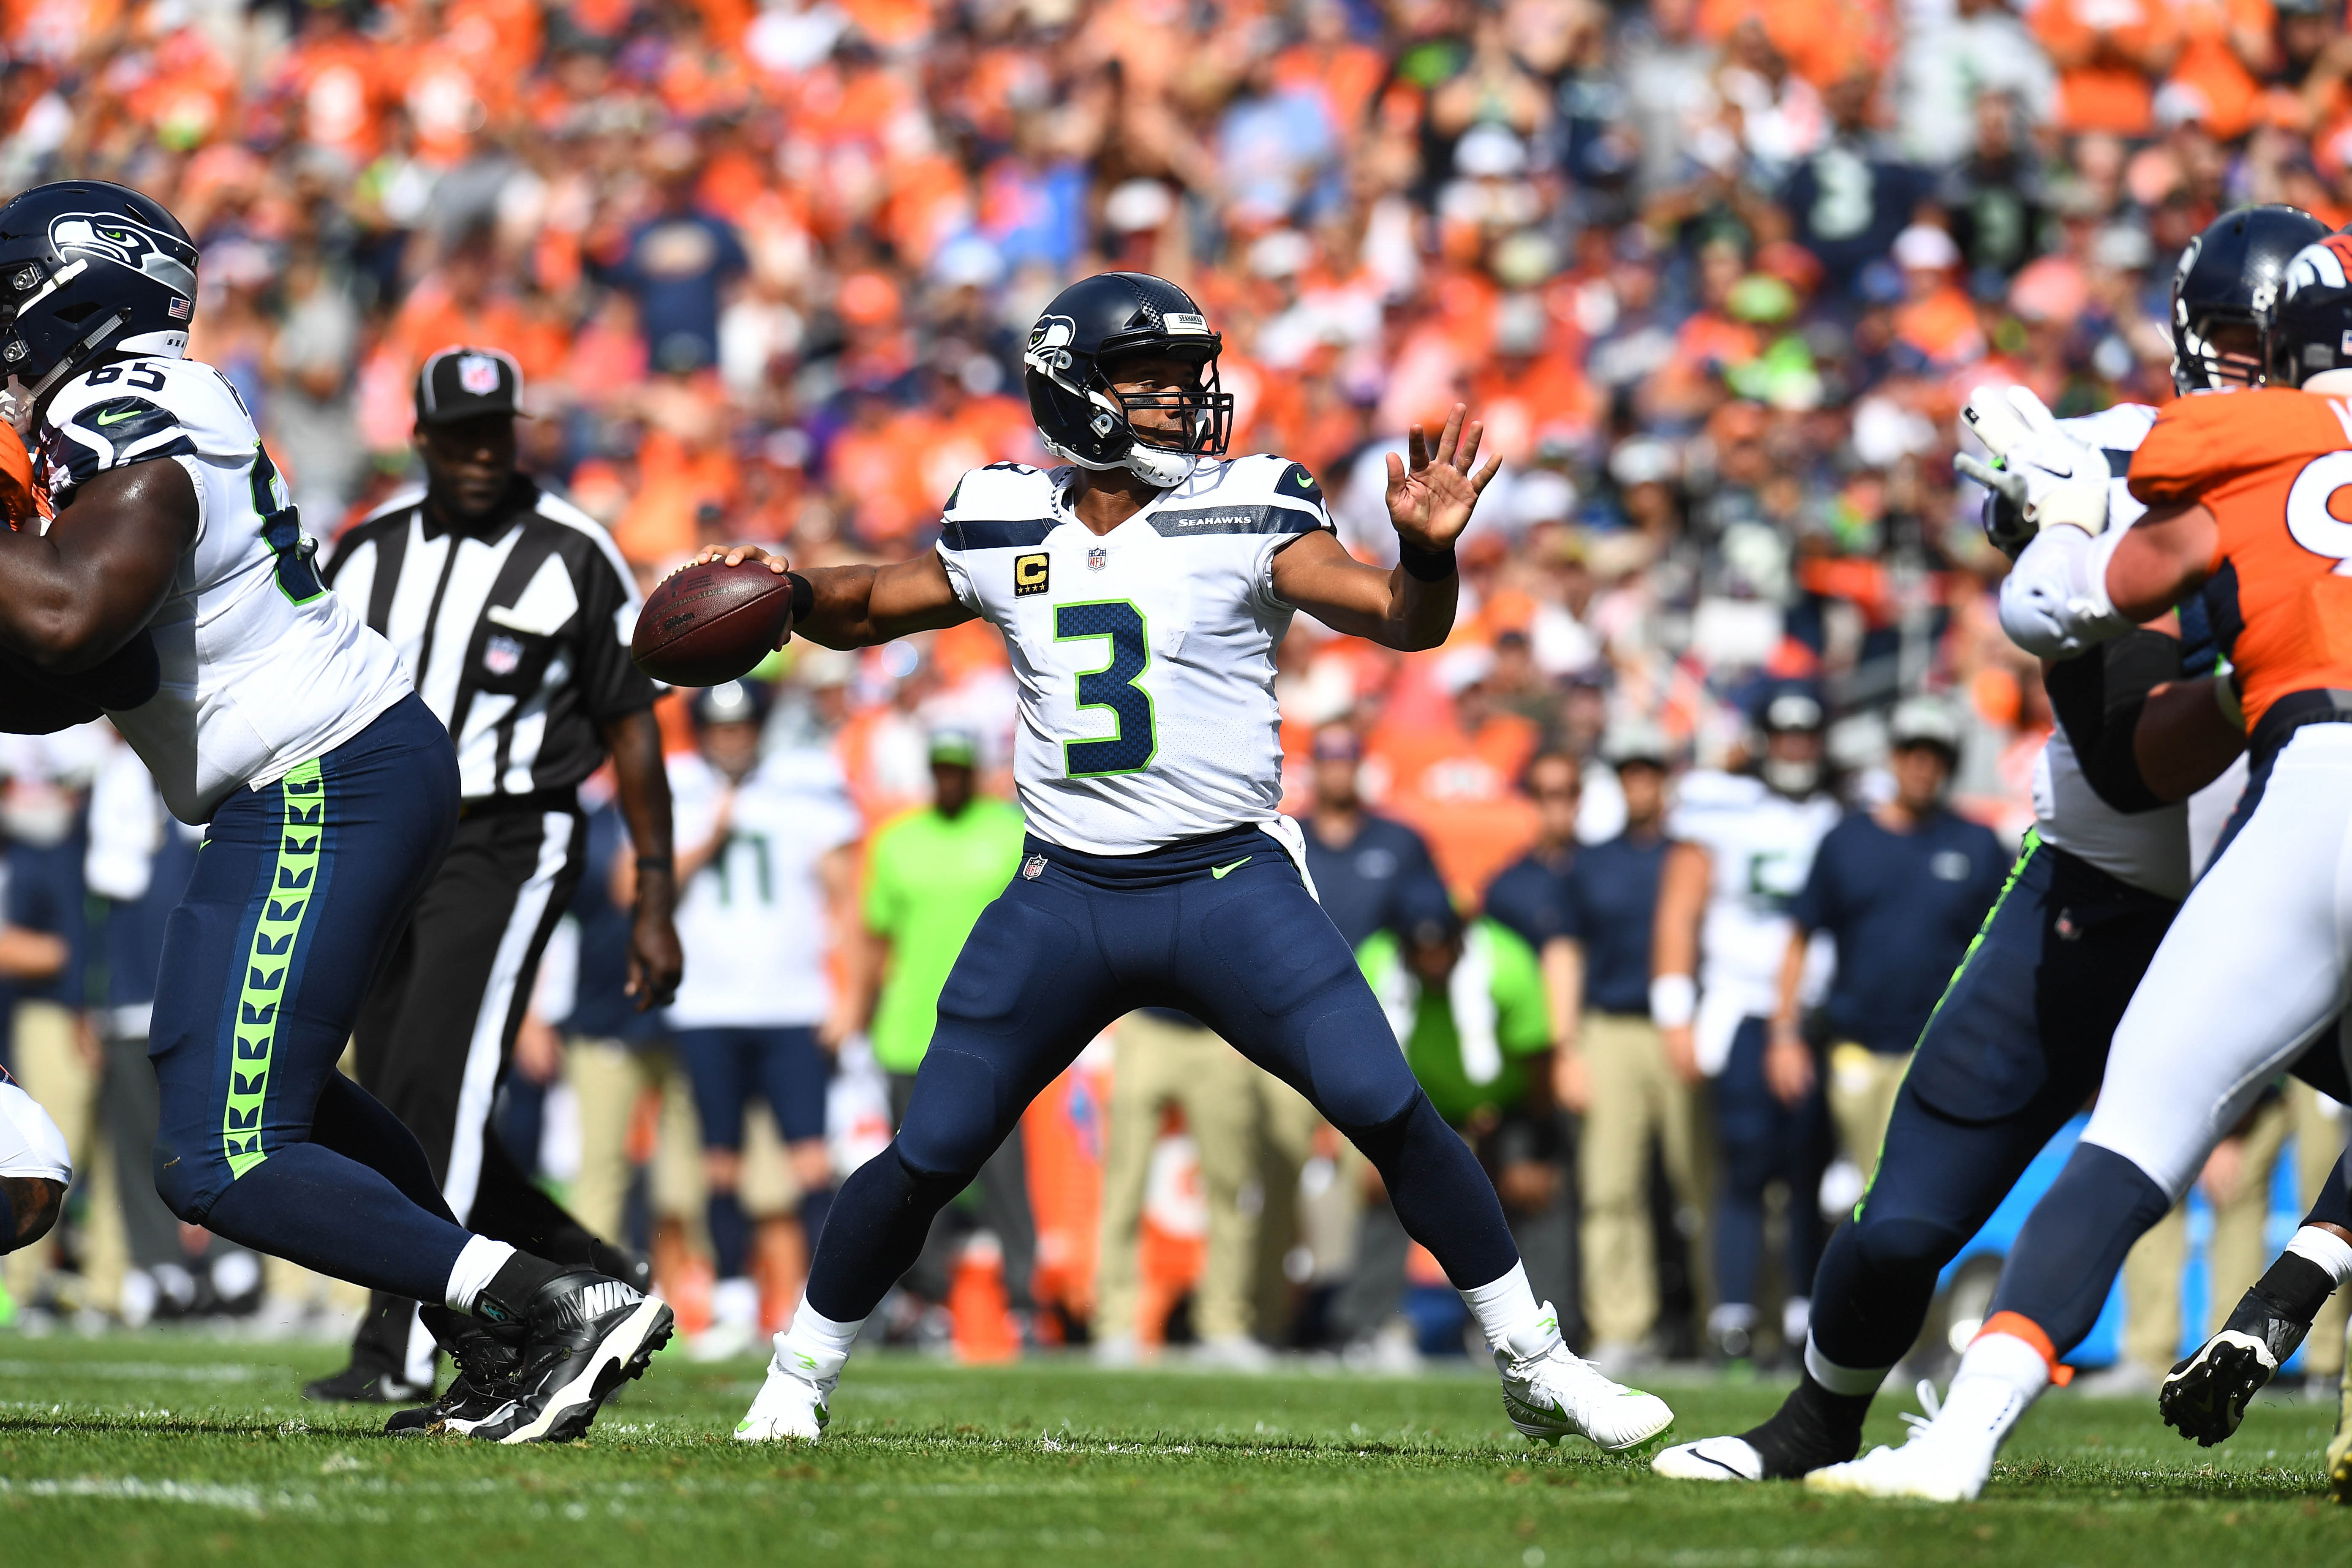 Seattle Seahawks quarterback Russell Wilson (3) attempts a pass in the second quarter against the Denver Broncos at Broncos Stadium at Mile High.